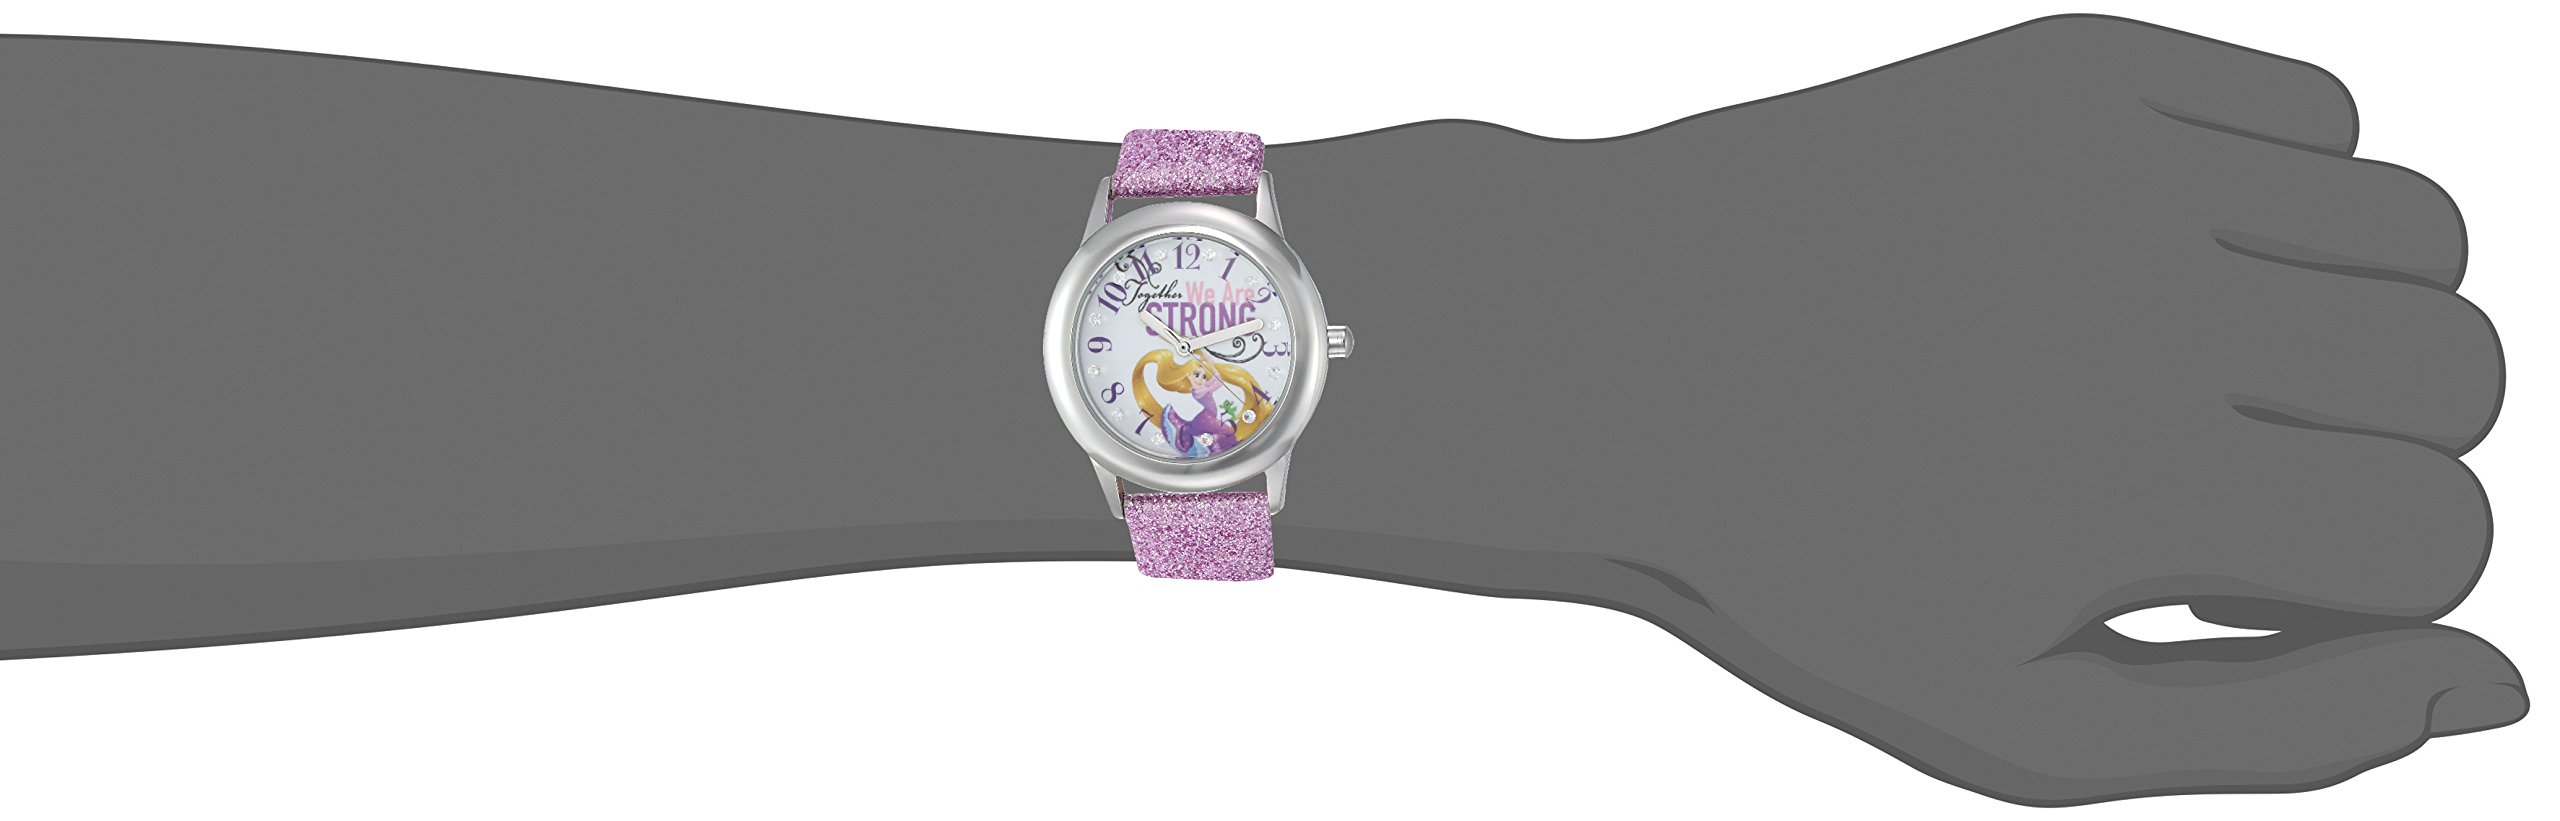 Disney Girl's 'Rapunzel' Quartz Stainless Steel and Leather Watch, Color:Purple (Model: W002962)